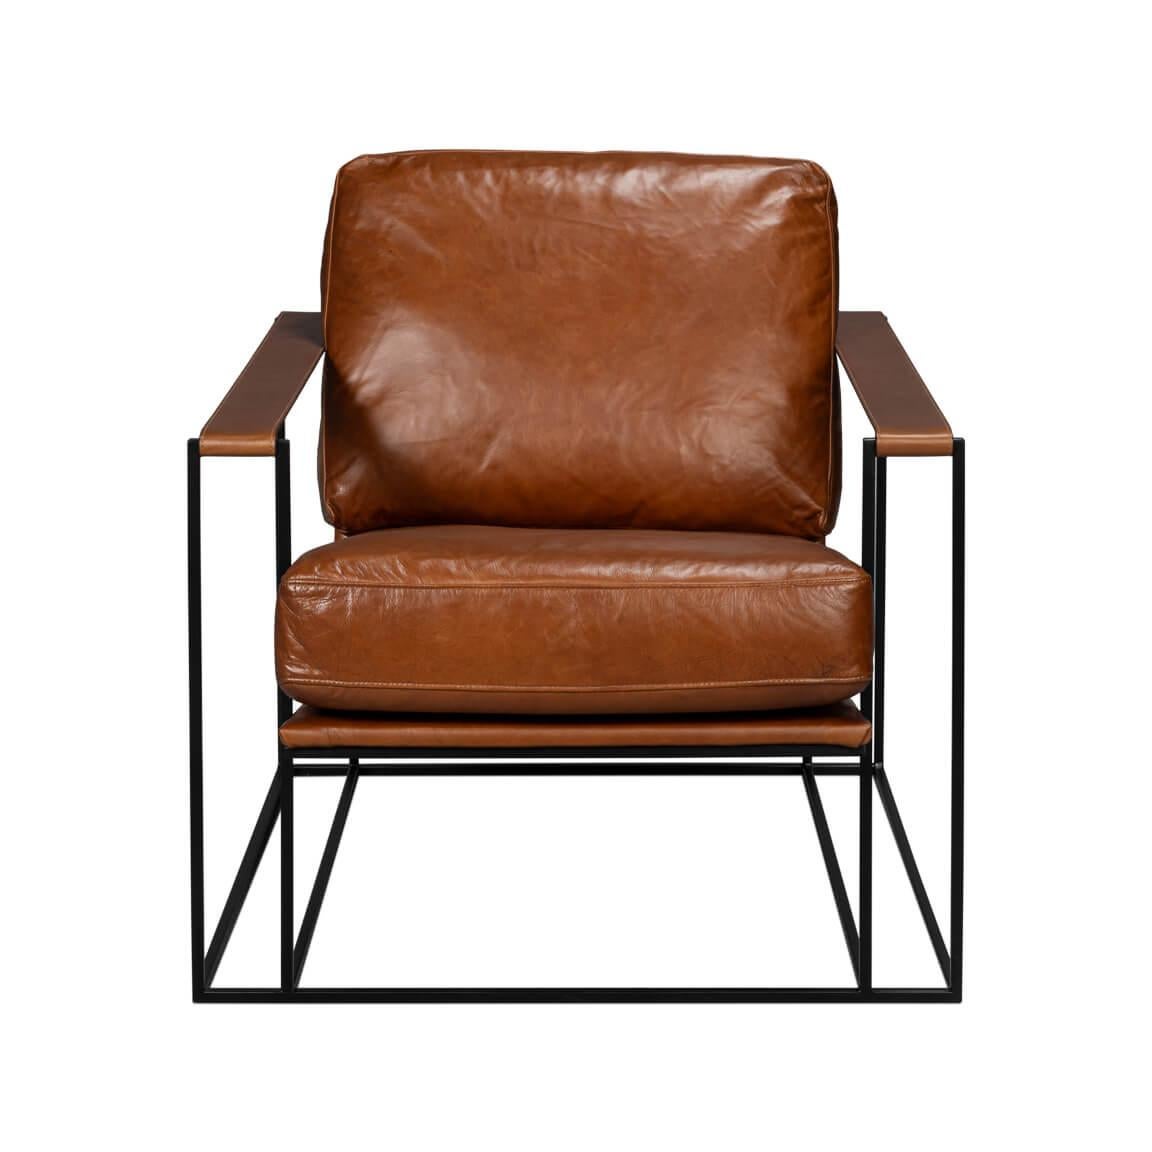 Upholstered in top-grade Havana Brown leather, this chair is a statement piece that adds a modern touch to any space. Its unique double iron frame not only provides robust support but also contributes to its sleek and stylish look.

With dimensions